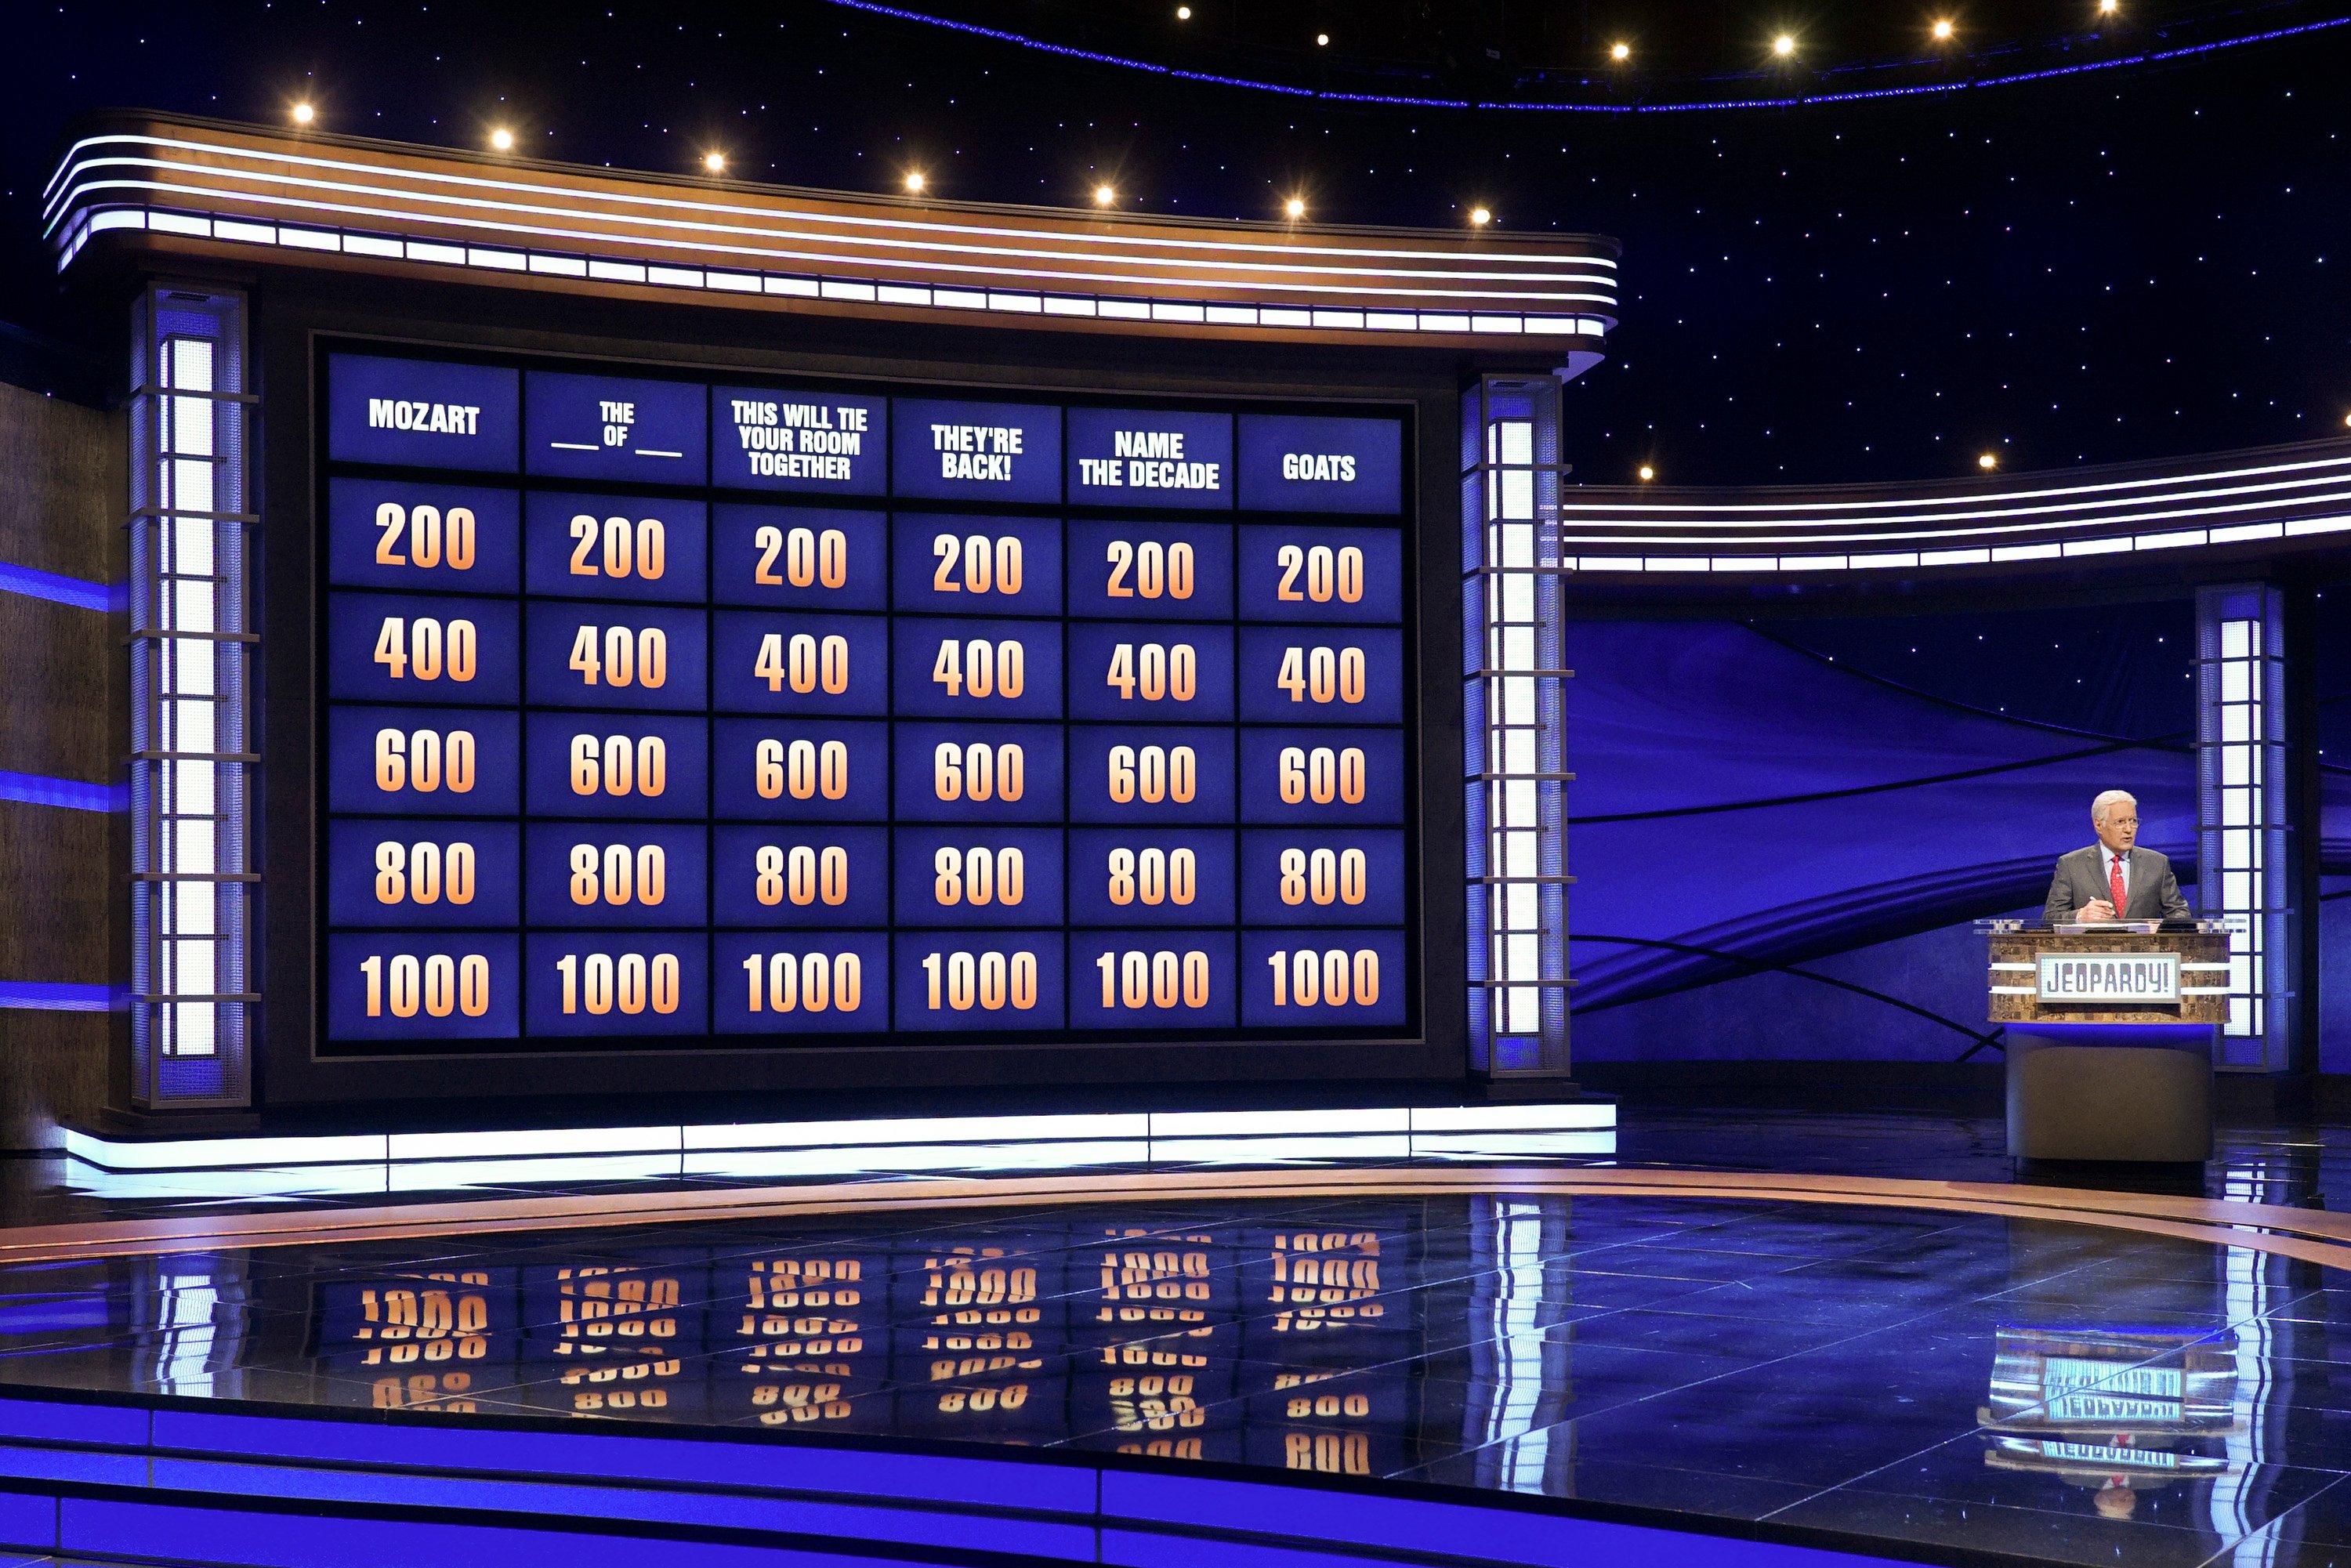 A familiar sight to 'Jeopardy!' fans: the quiz show's game board clues.